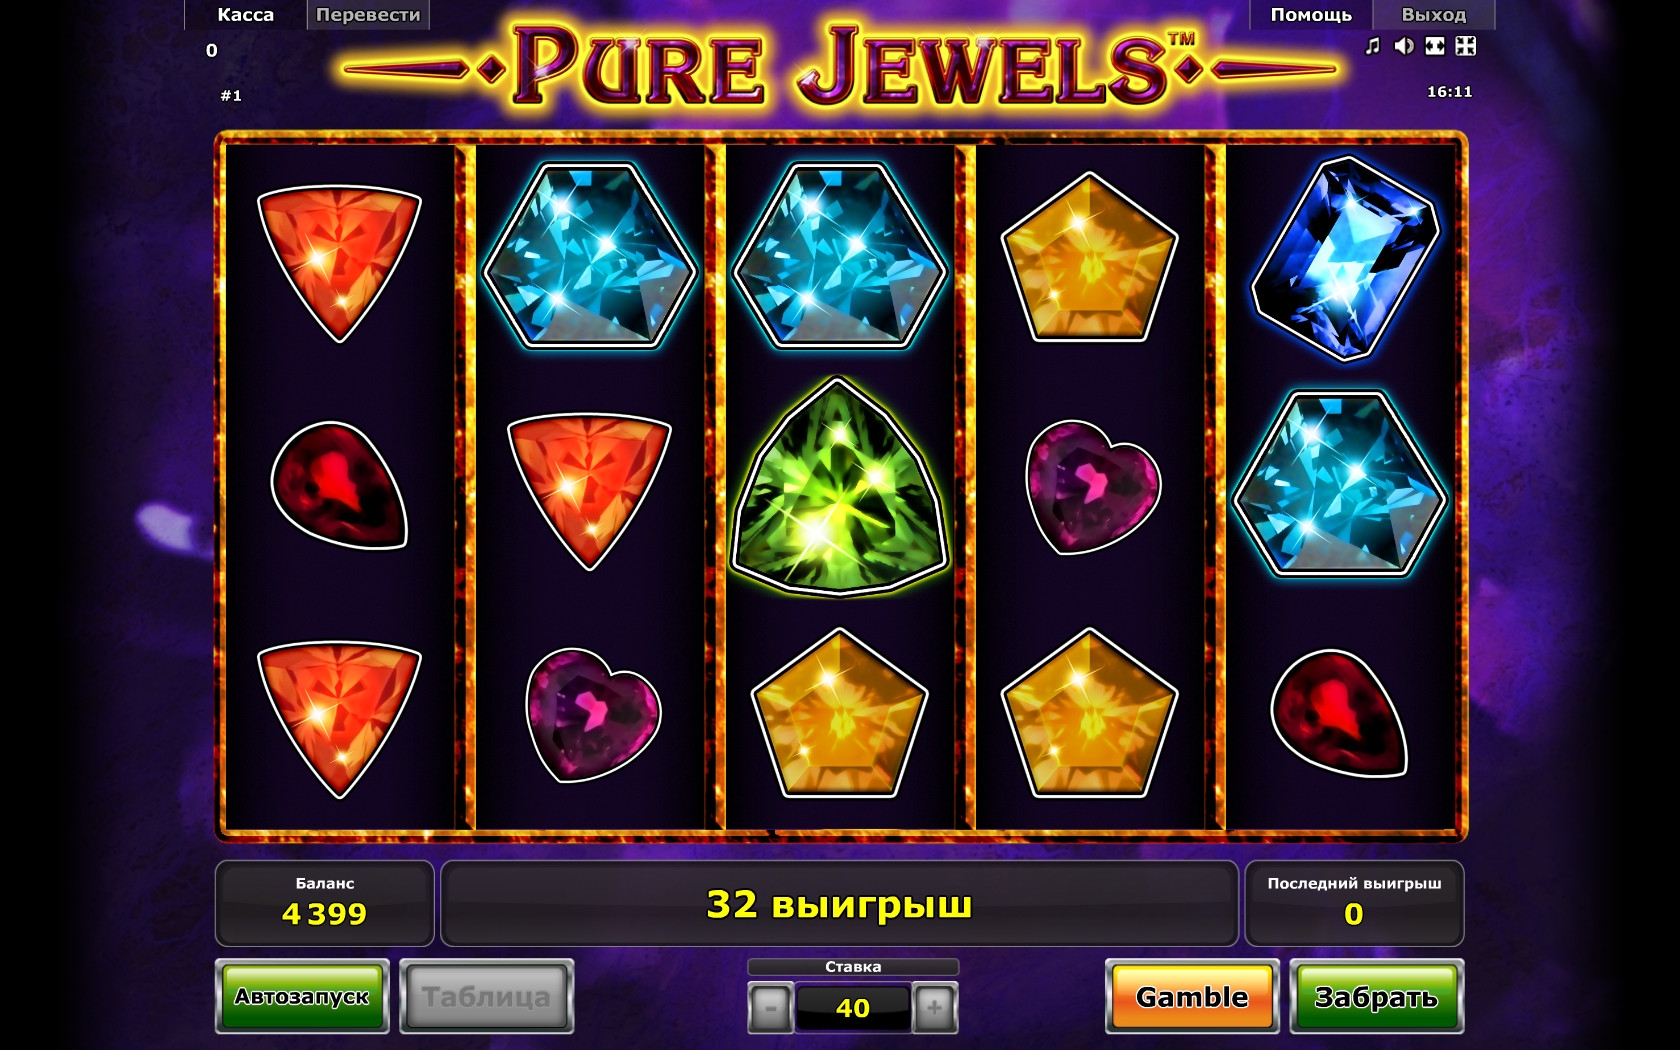 Pure Jewels (Pure Jewels) from category Slots